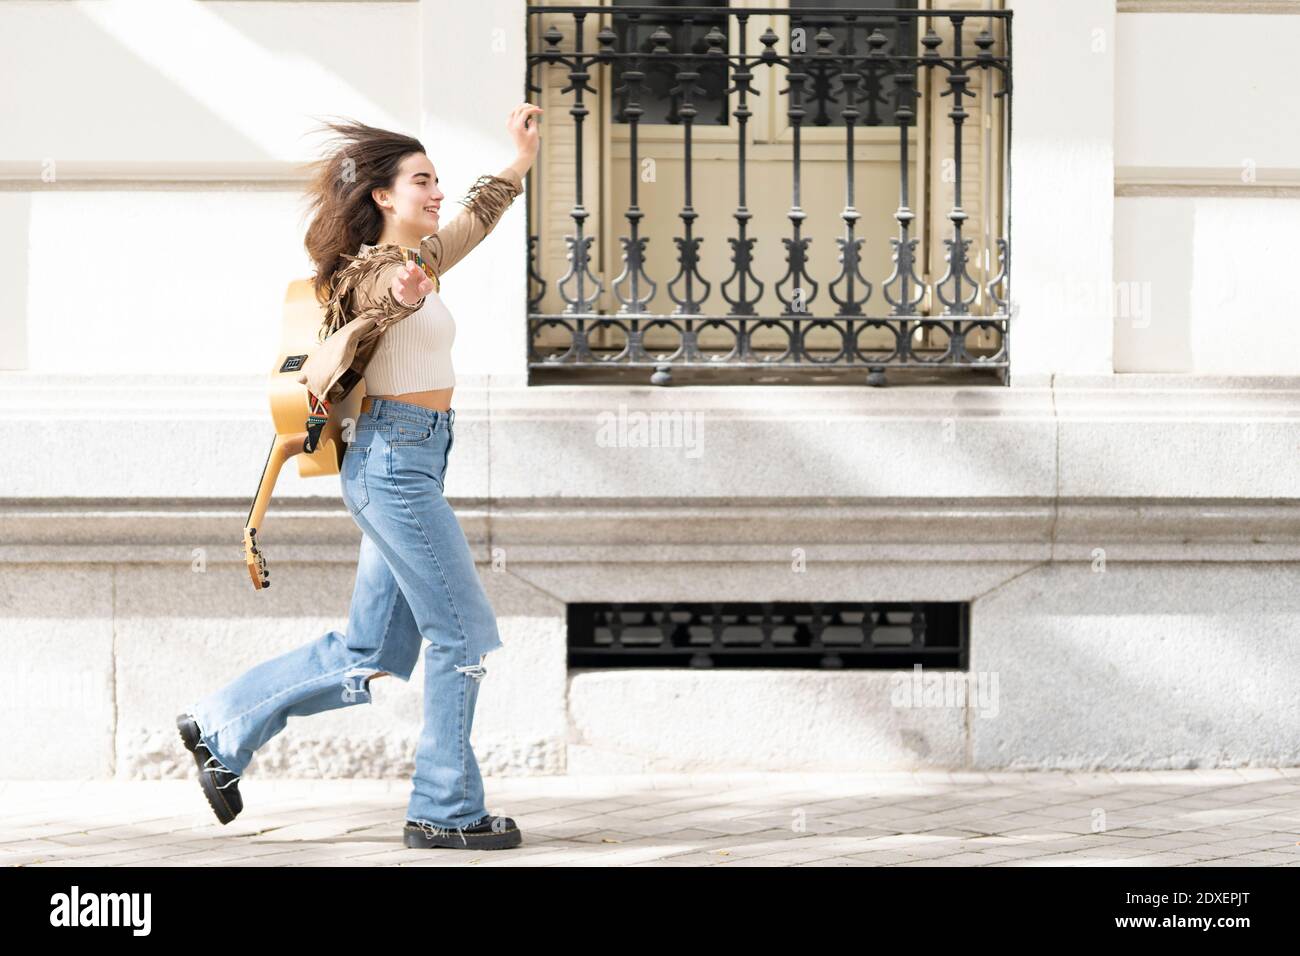 Cheerful female musician with arms outstretched running on footpath by building in city Stock Photo